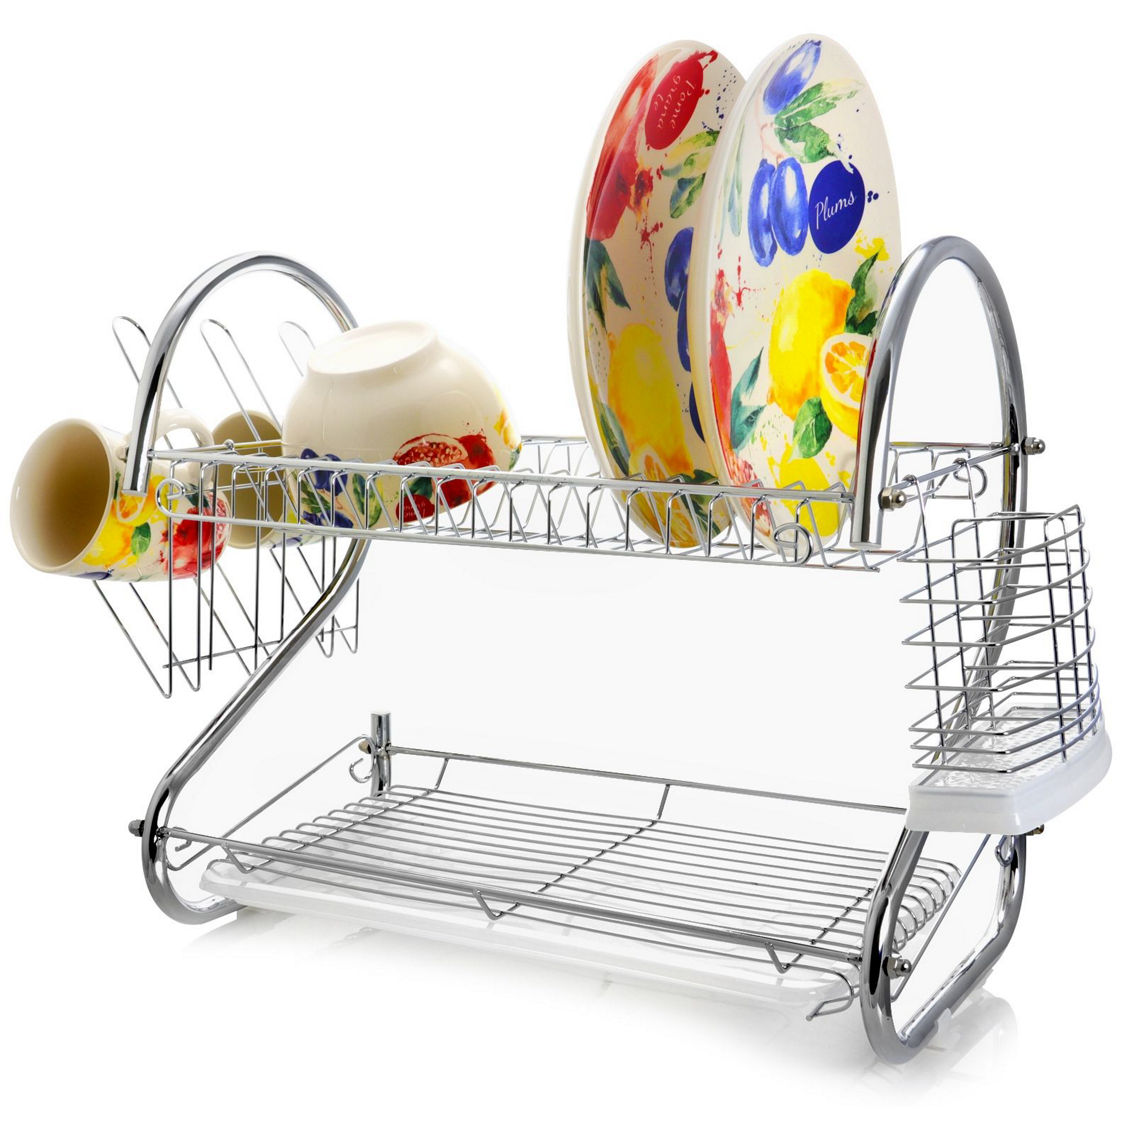 MegaChef 16 Inch Two Shelf Dish Rack with Easily Removable Draining Tray, 6 Cup - Image 4 of 5